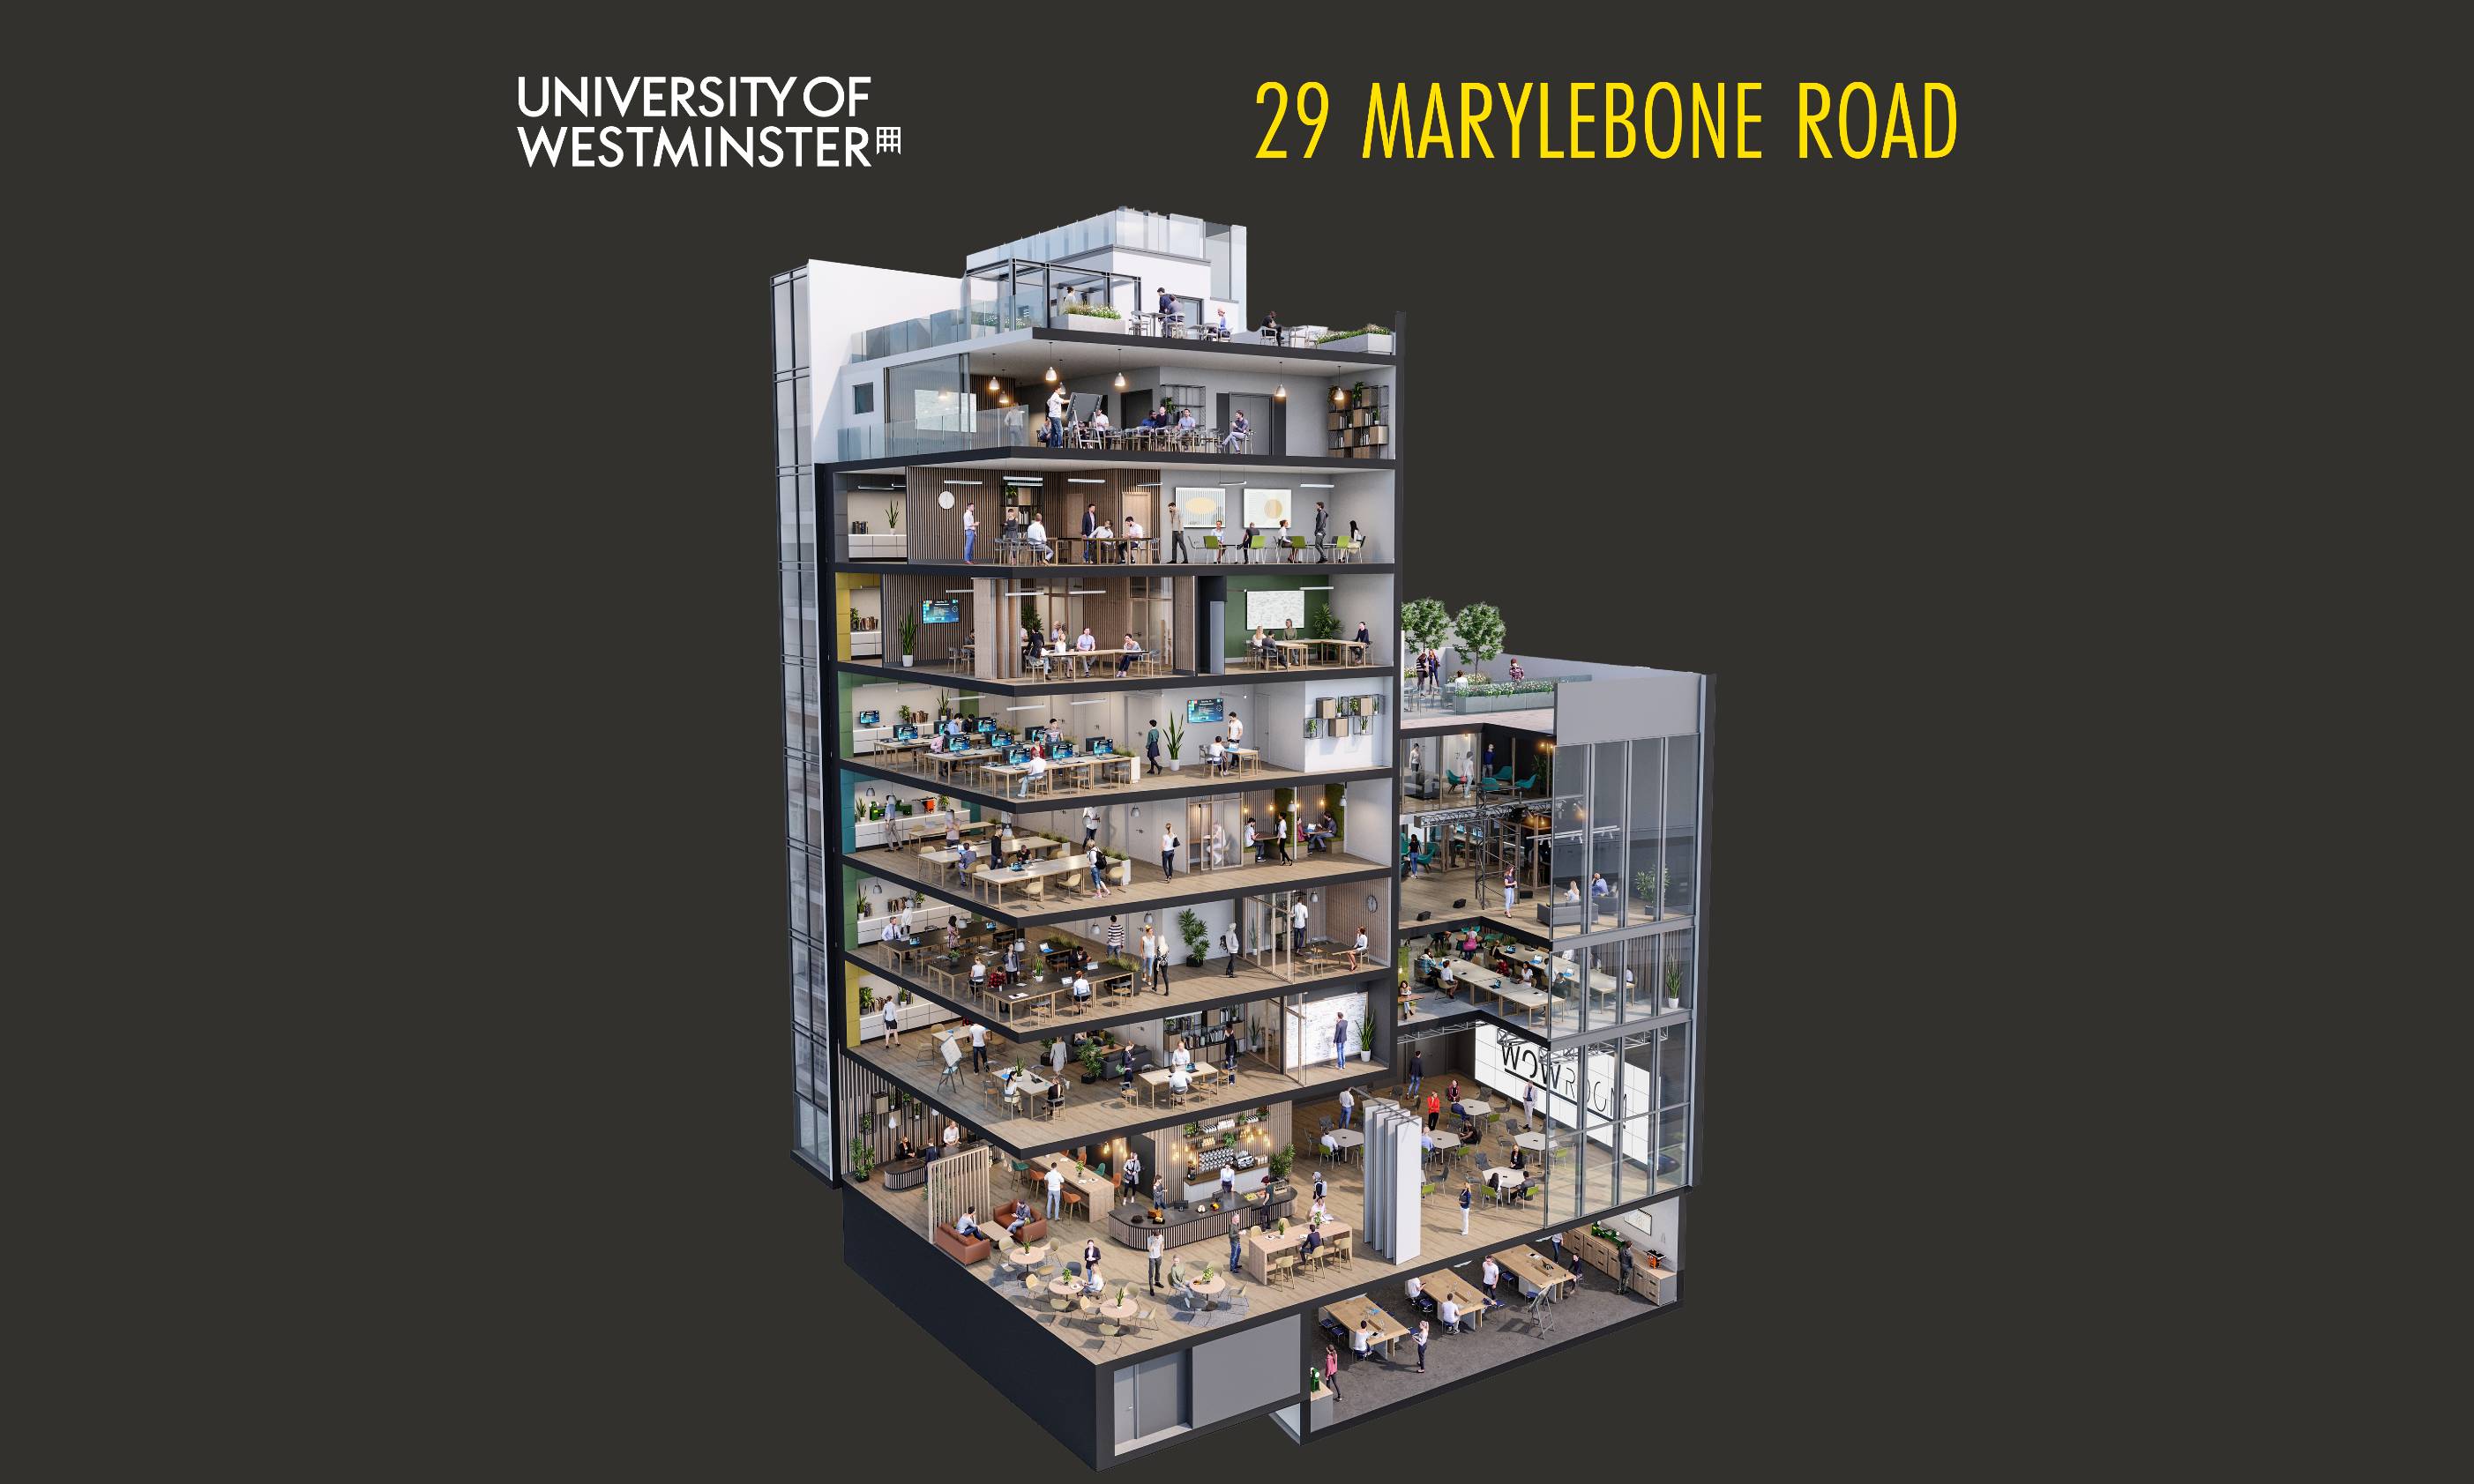 Office for Students grants £5.8m for University of Westminster towards employability spaces at 29 Marylebone Road